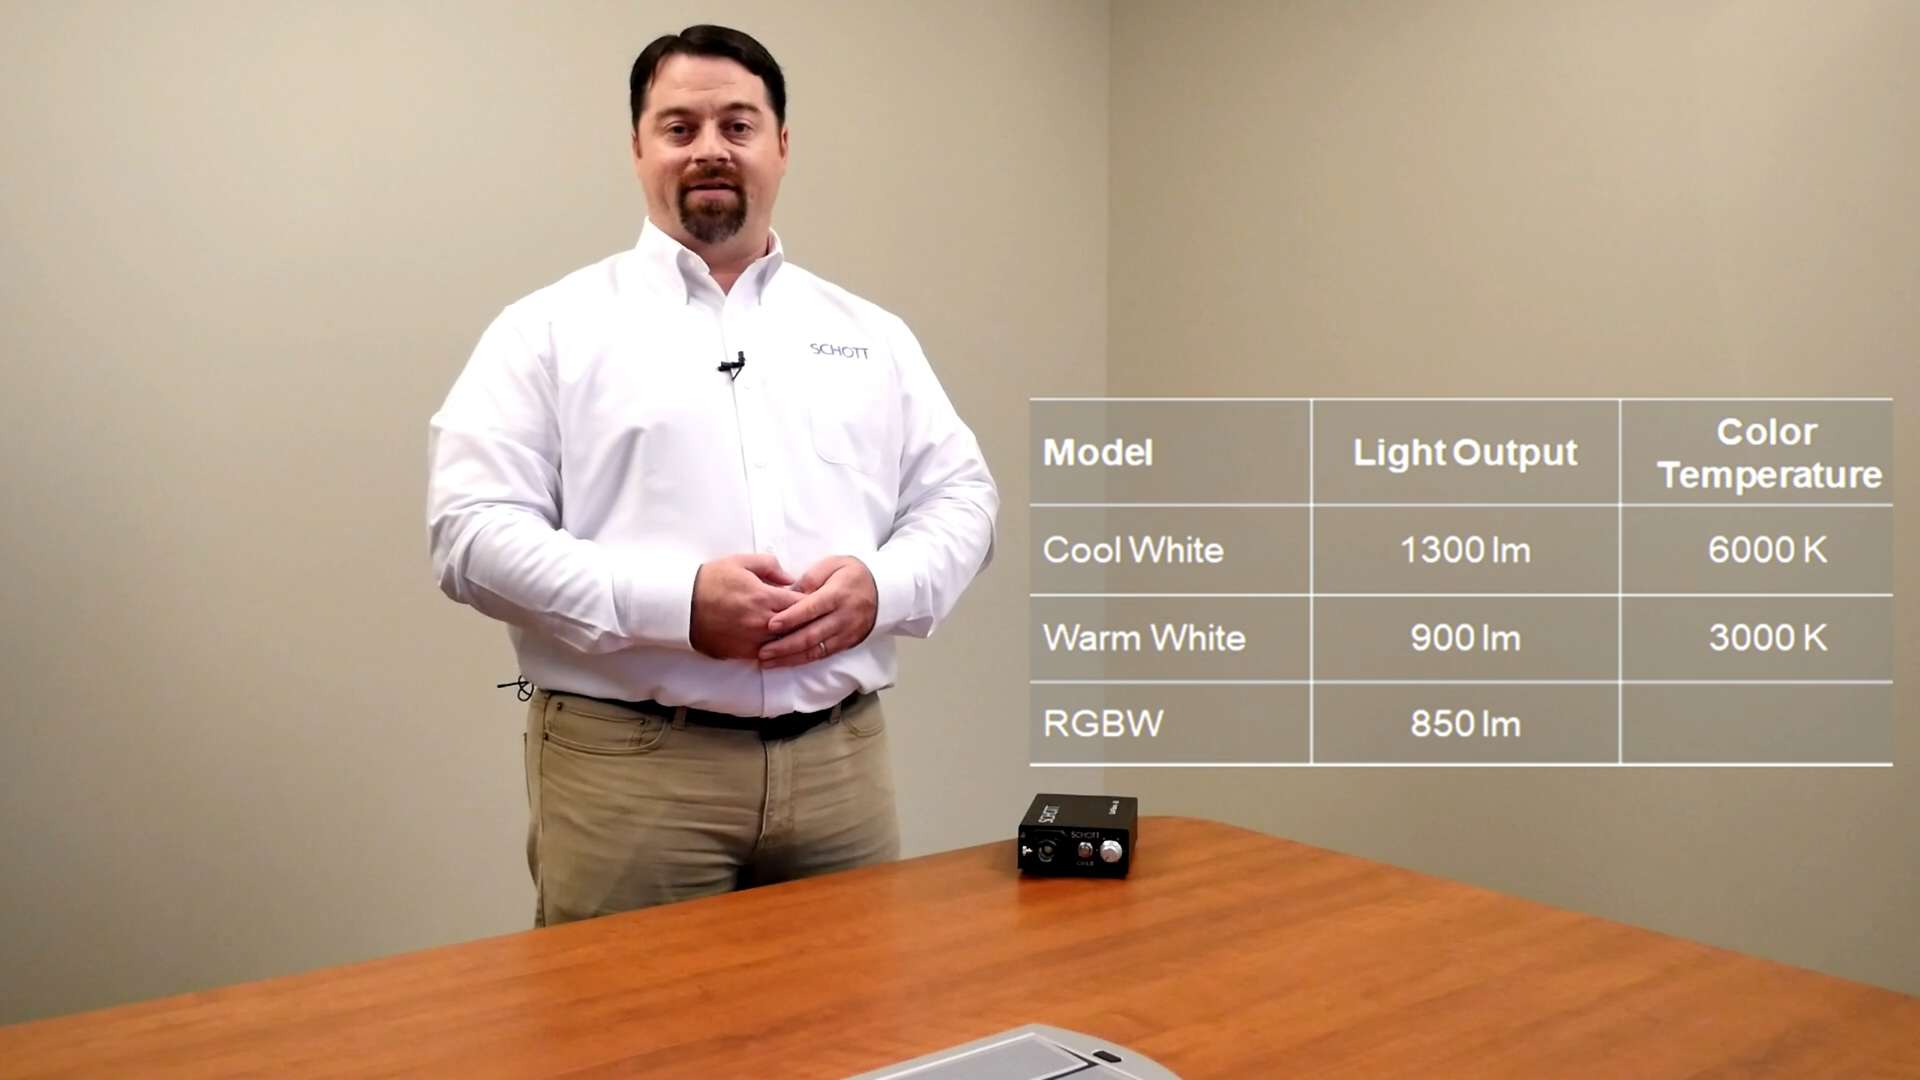 Learn more about the light quality of the SCHOTT ColdVision CV-LS LED light source